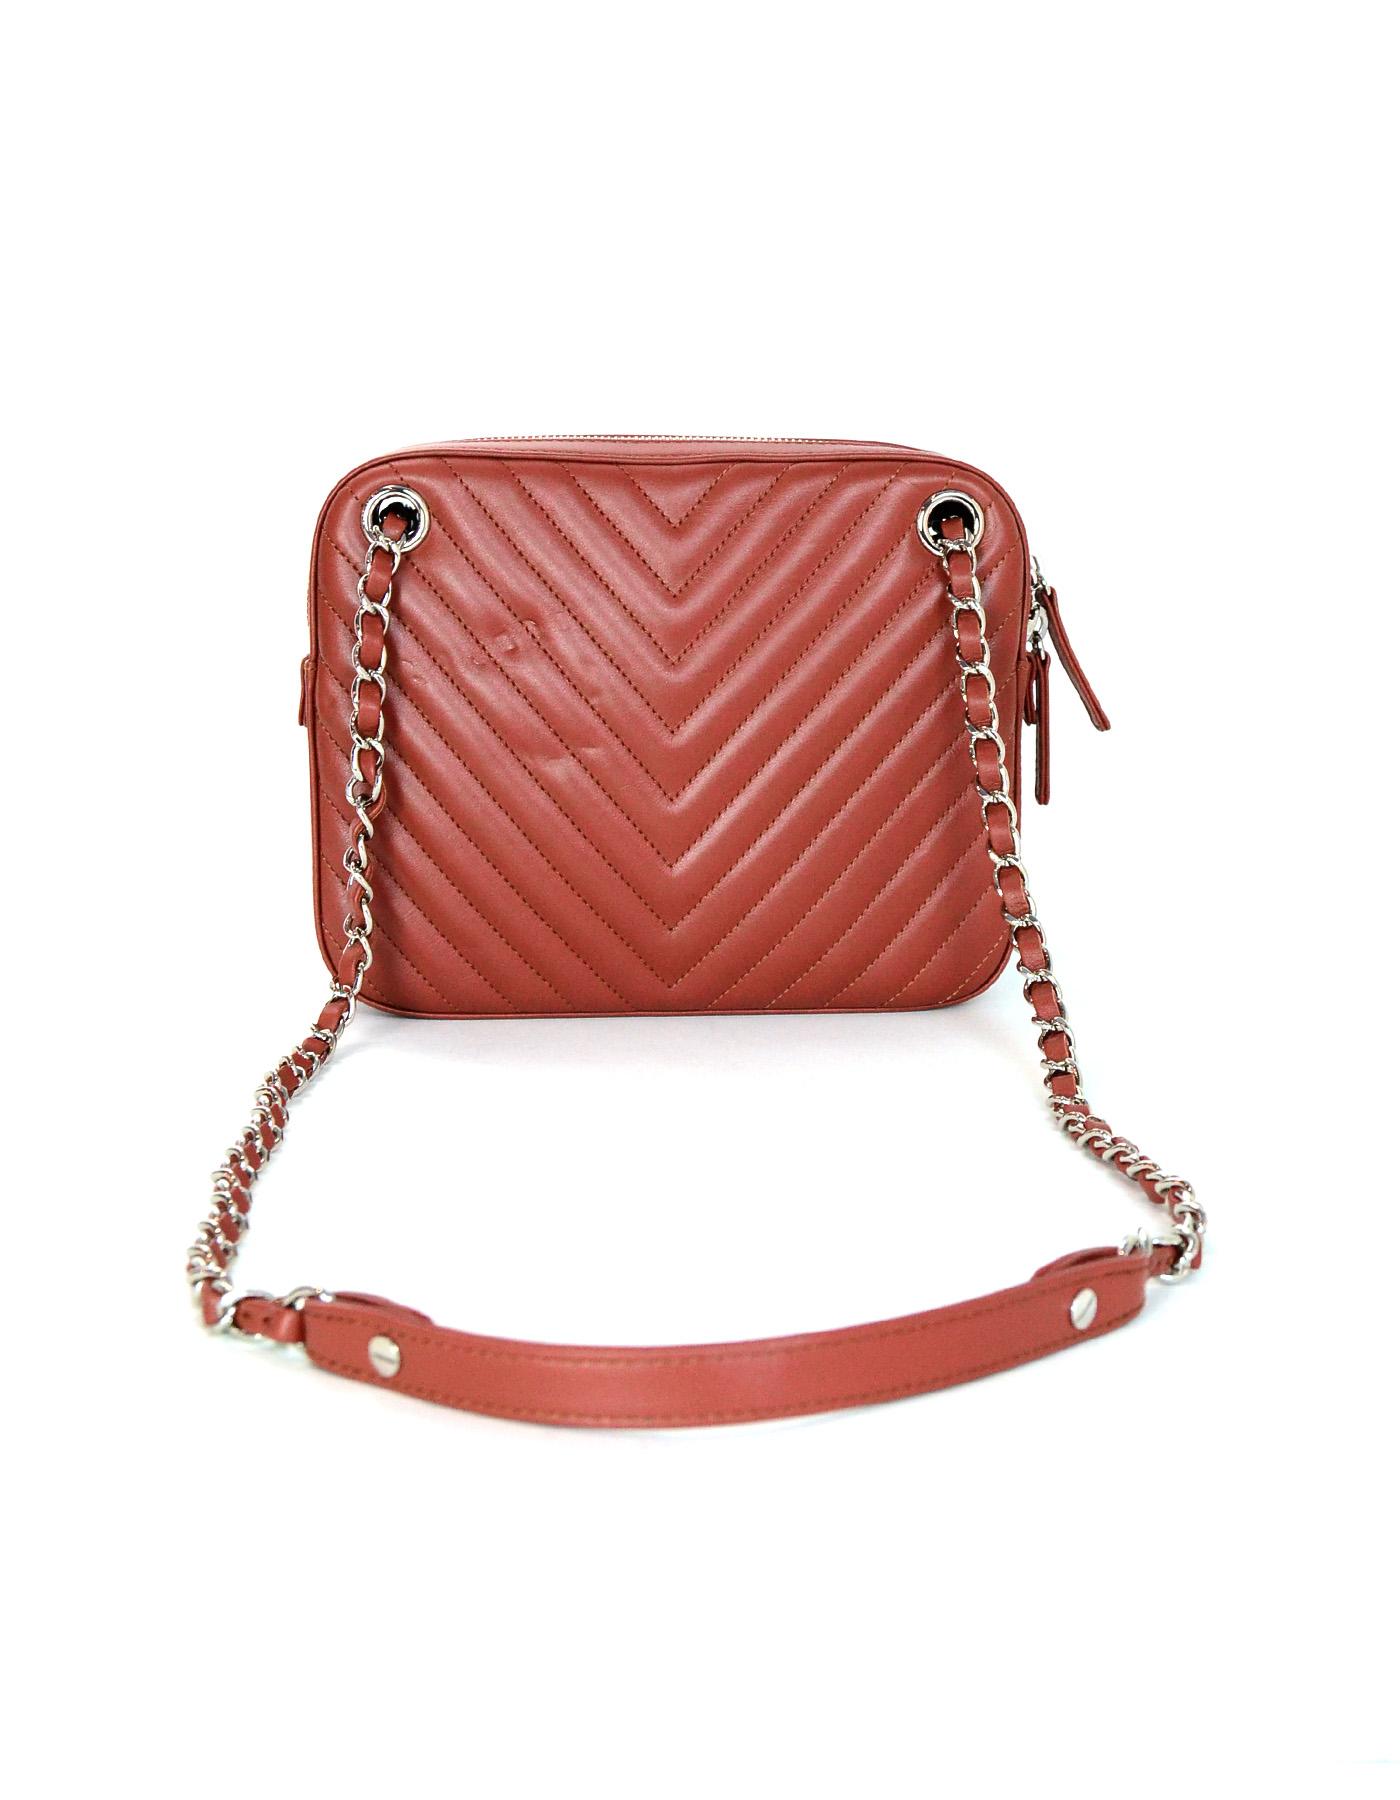 Chanel '18 Burgundy/Brick Chevron Quilted Camera Crossbody Bag w Receipt In Excellent Condition In New York, NY